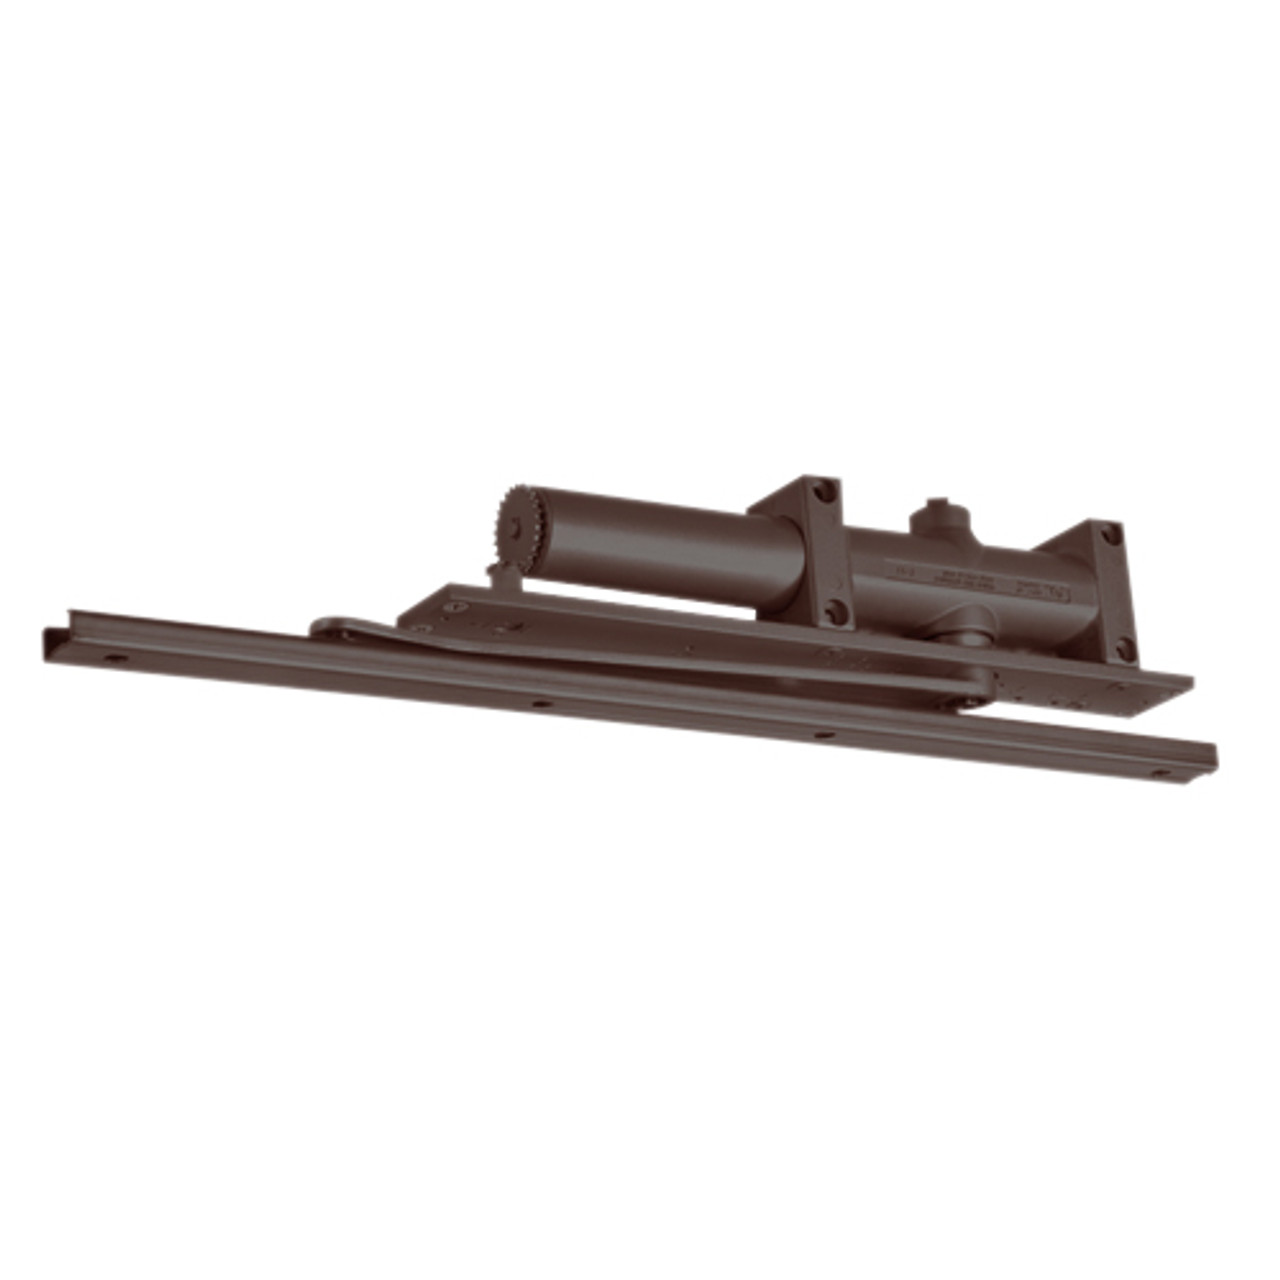 7970DPS-690-RH Norton 7900 Series Non-Hold Open Overhead Concealed Security Closers with Multi-Sized Spring 1-6 in Statuary Bronze Finish